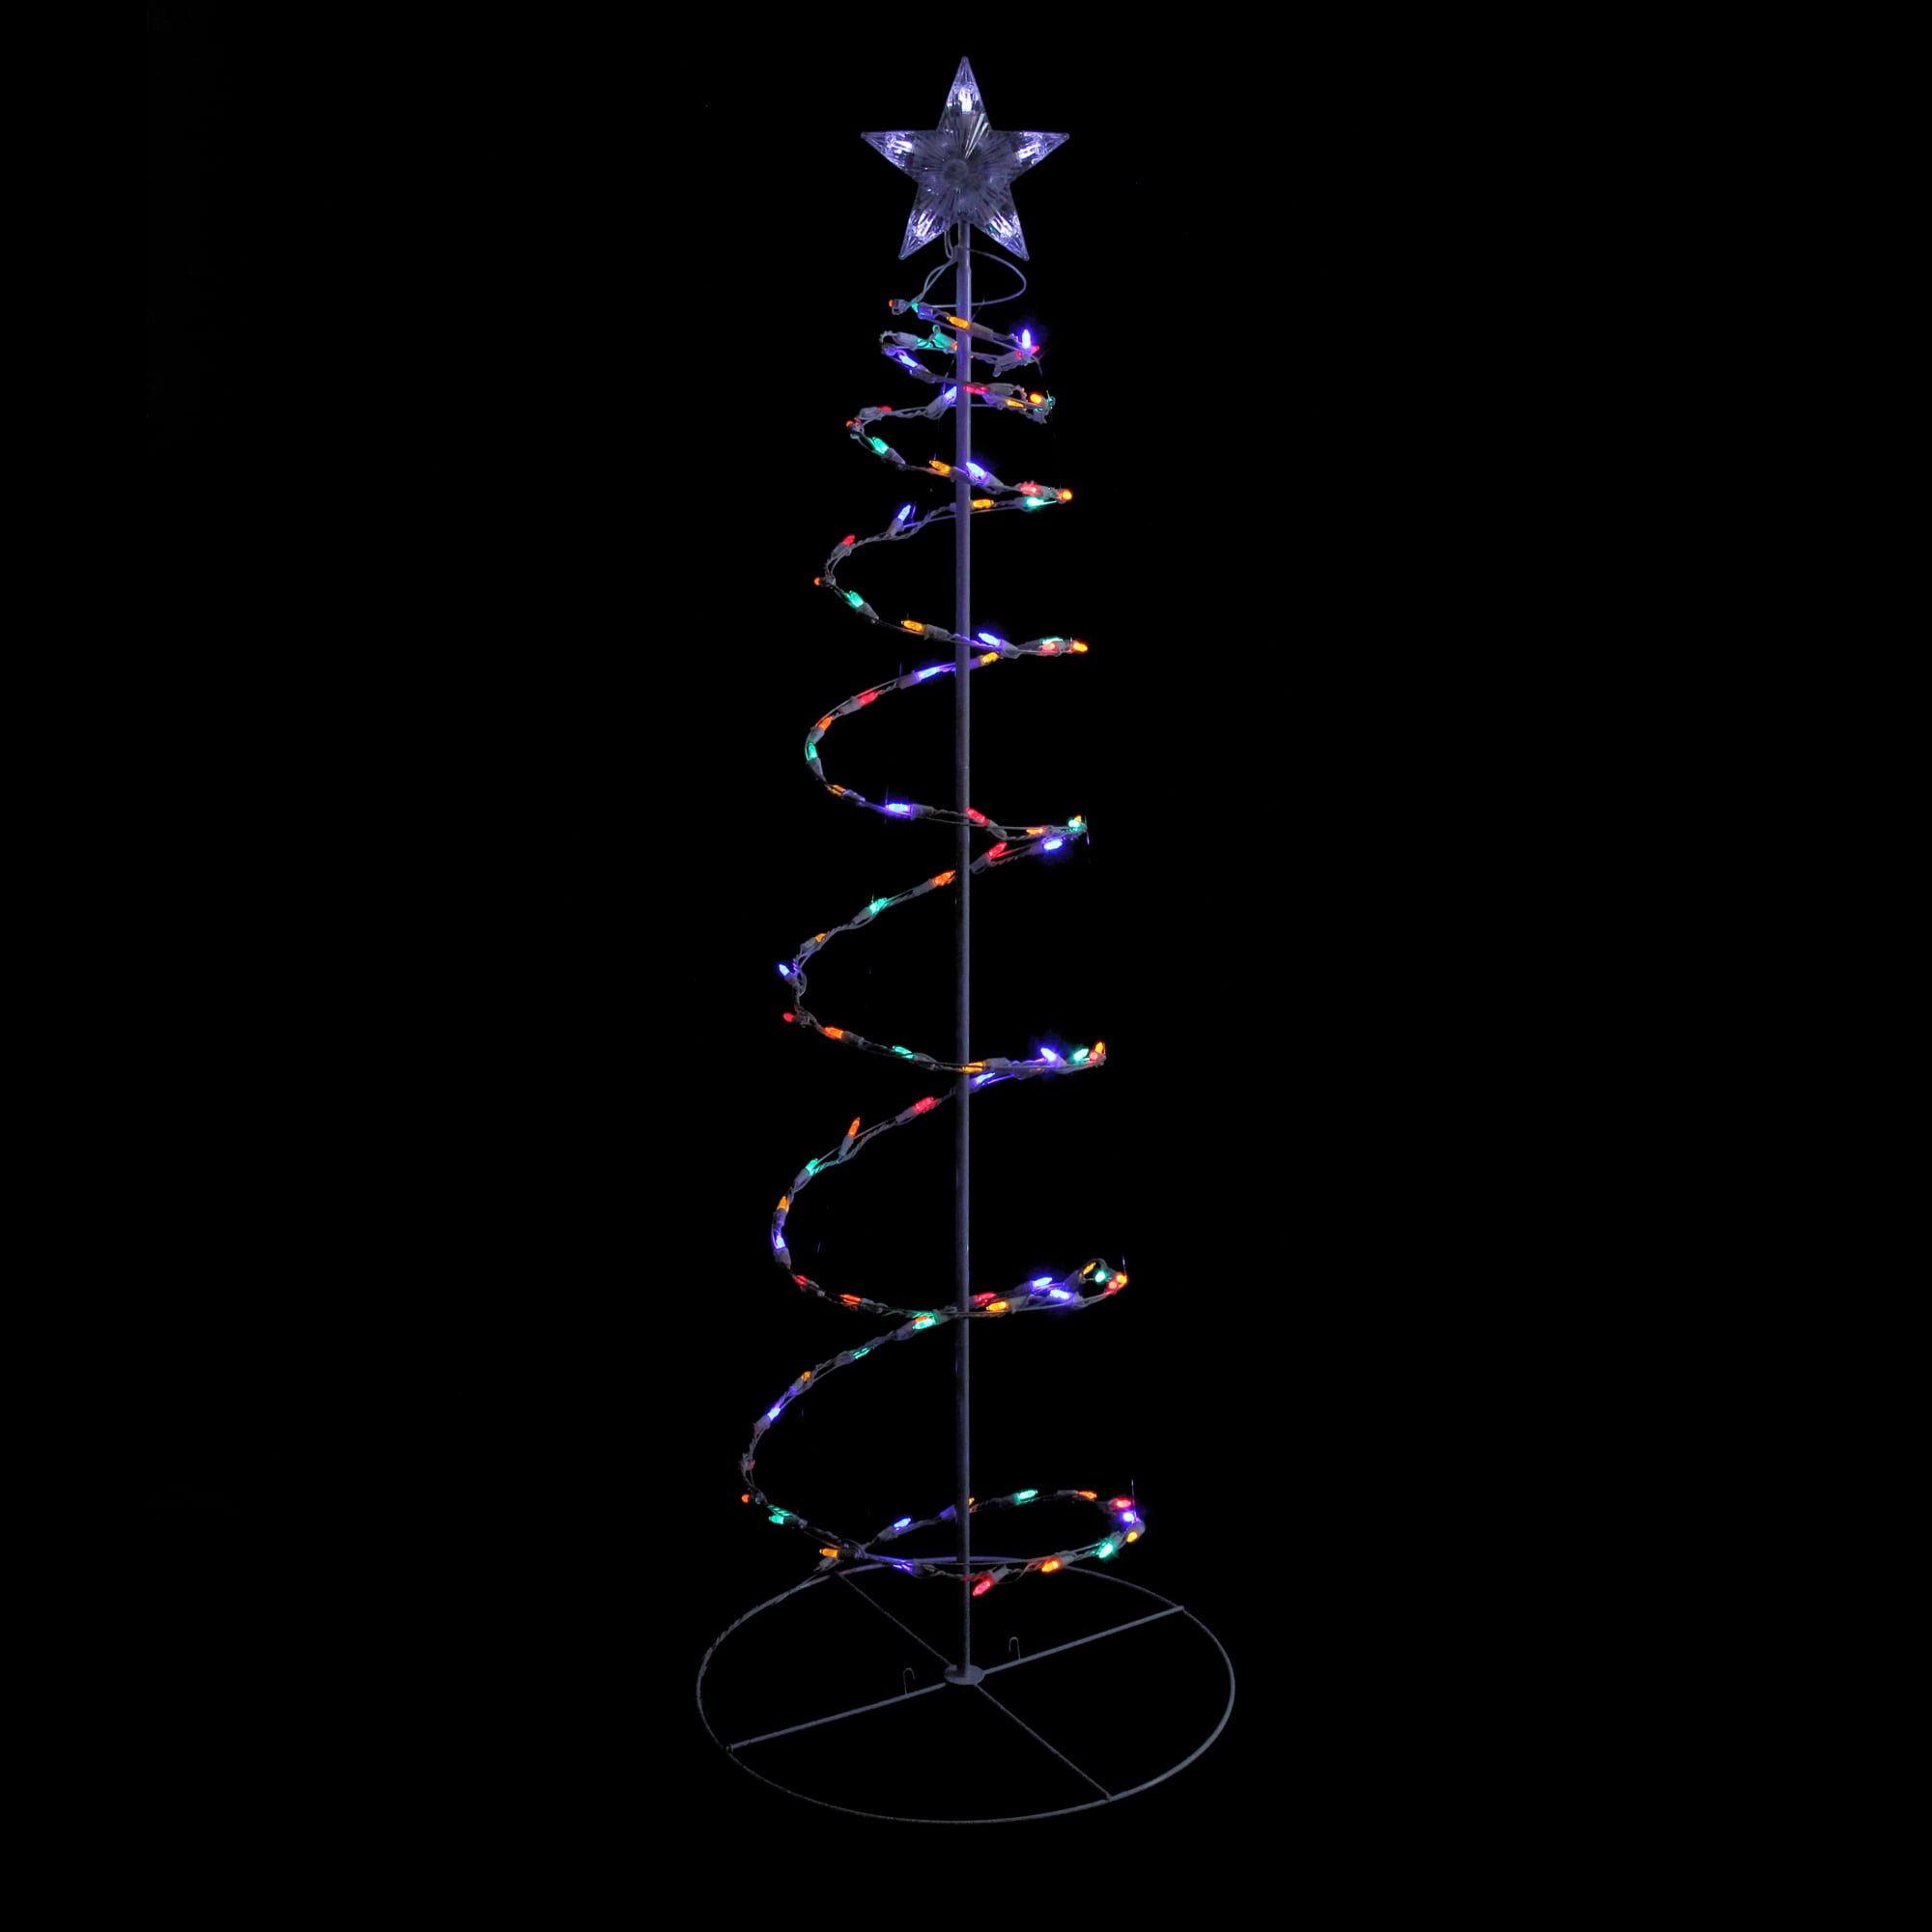 Details about   Kringle Express 5’ Christmas Pop Up Spiral Tree LED Outdoor Multi Color Light 